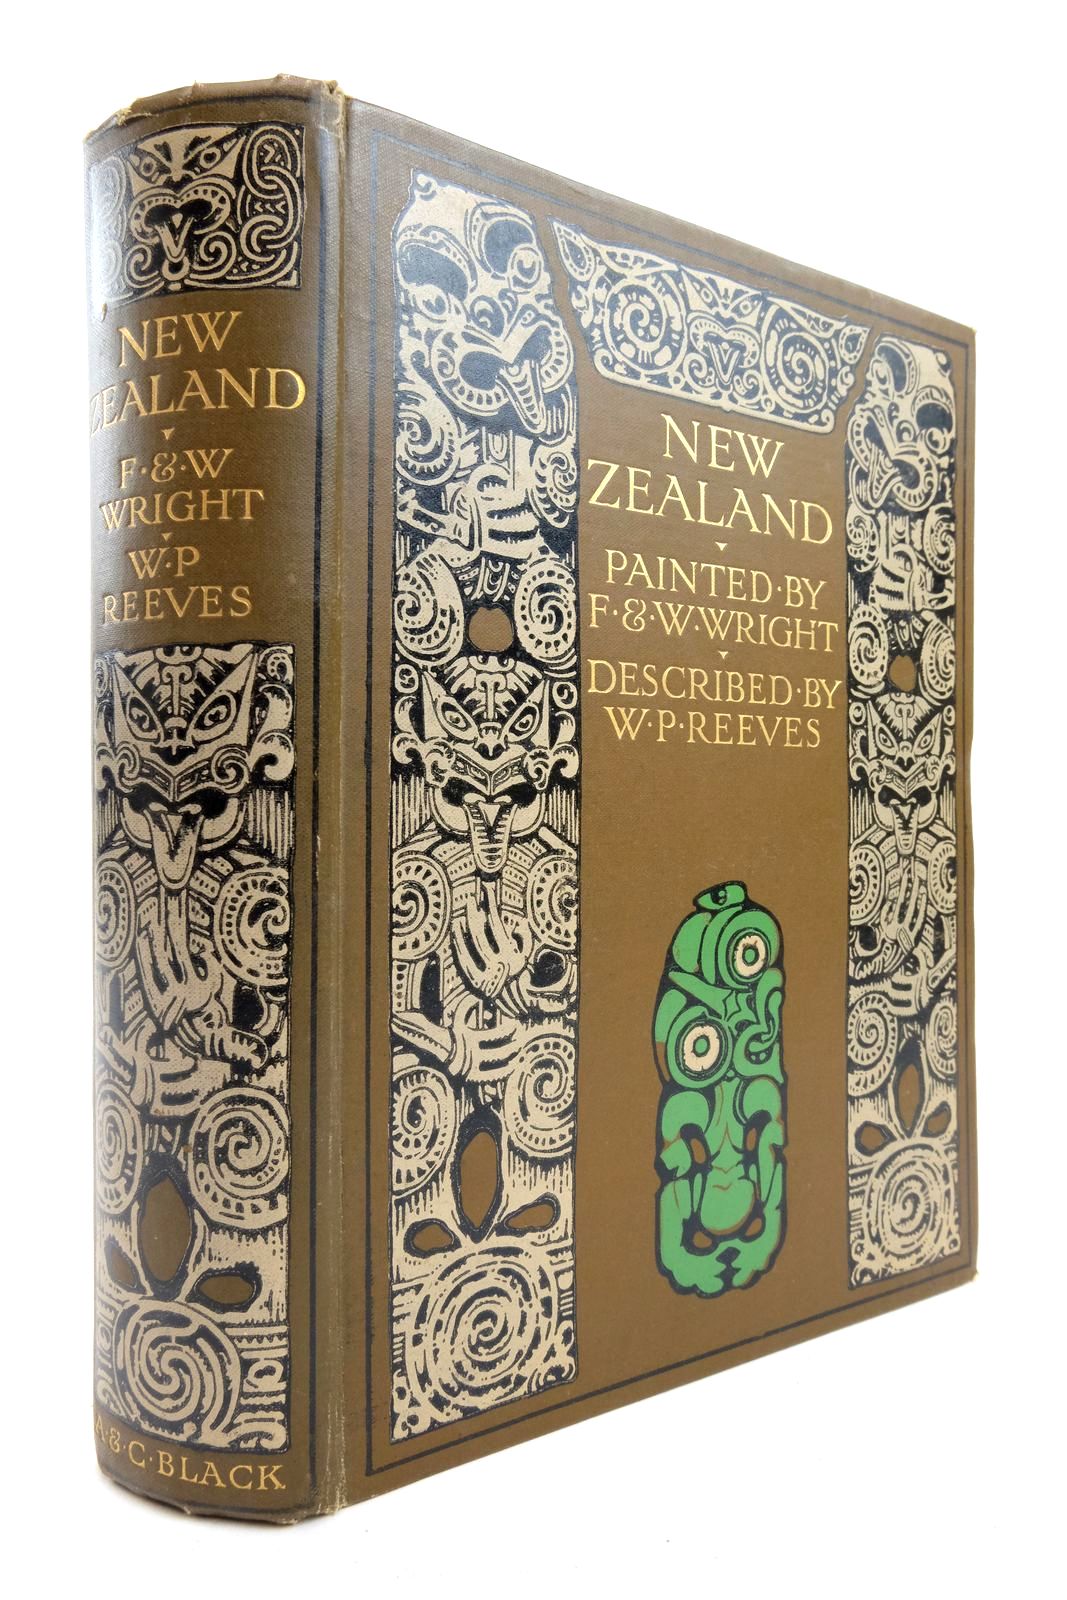 Photo of NEW ZEALAND written by Reeves, William Pember illustrated by Wright, F.
Wright, W. published by Adam & Charles Black (STOCK CODE: 2136993)  for sale by Stella & Rose's Books